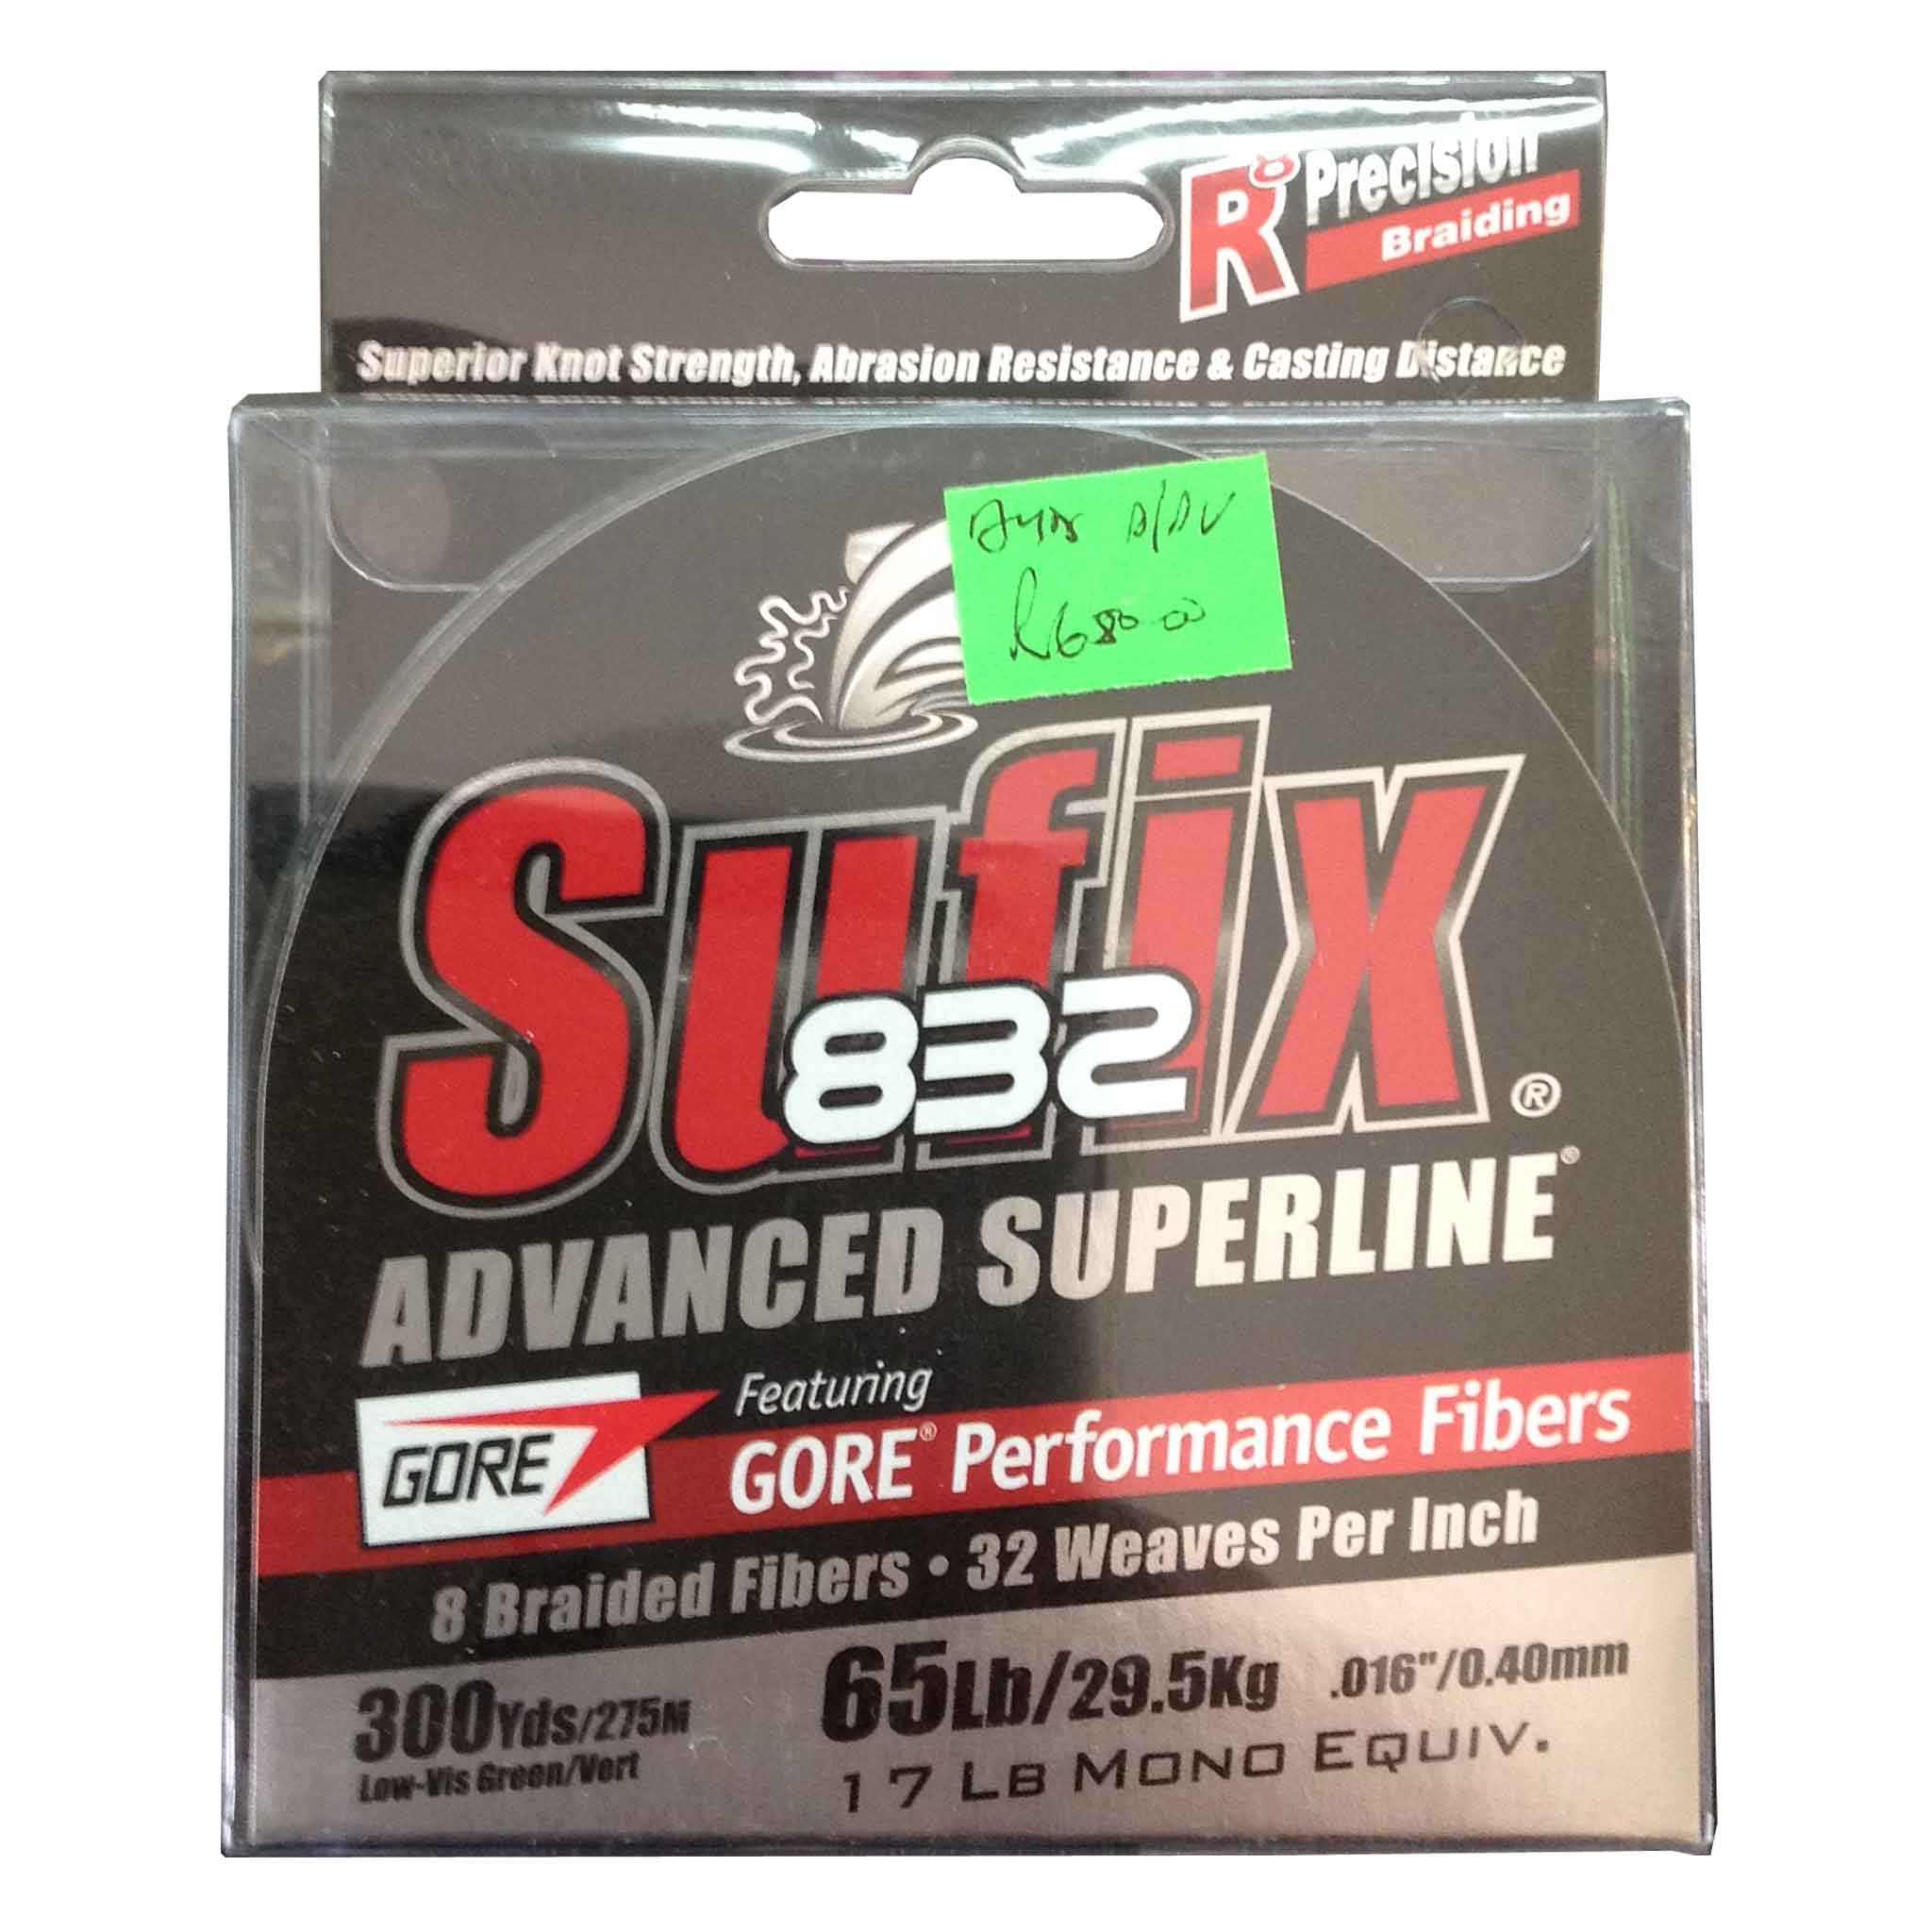 SUFIX 832 ADVANCED SUPERLINE BRAID 65LB - Moosa's Angling And Outdoor